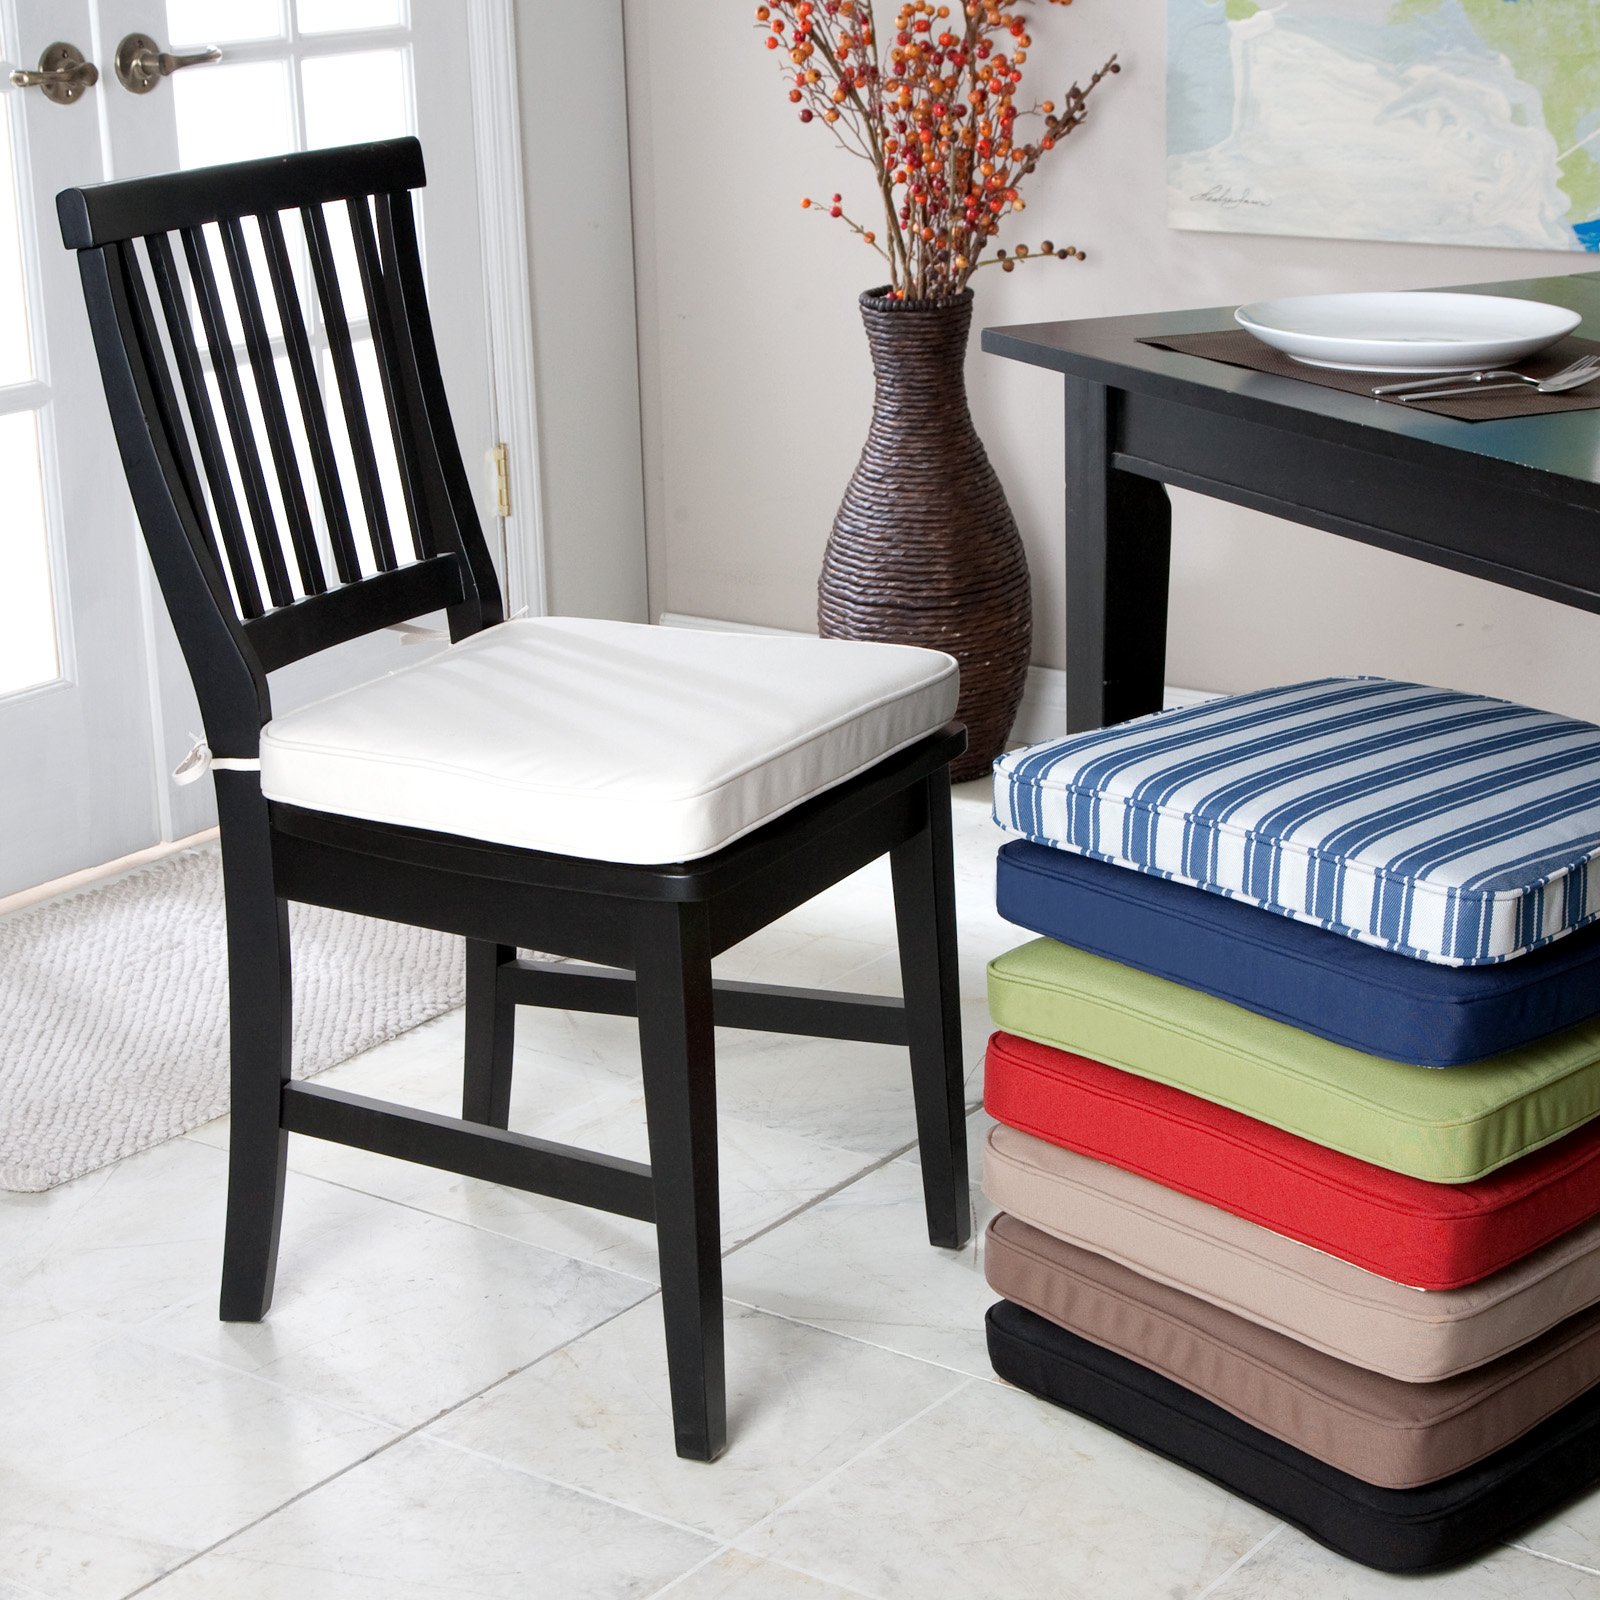 cushions for dining room chairs photo - 1